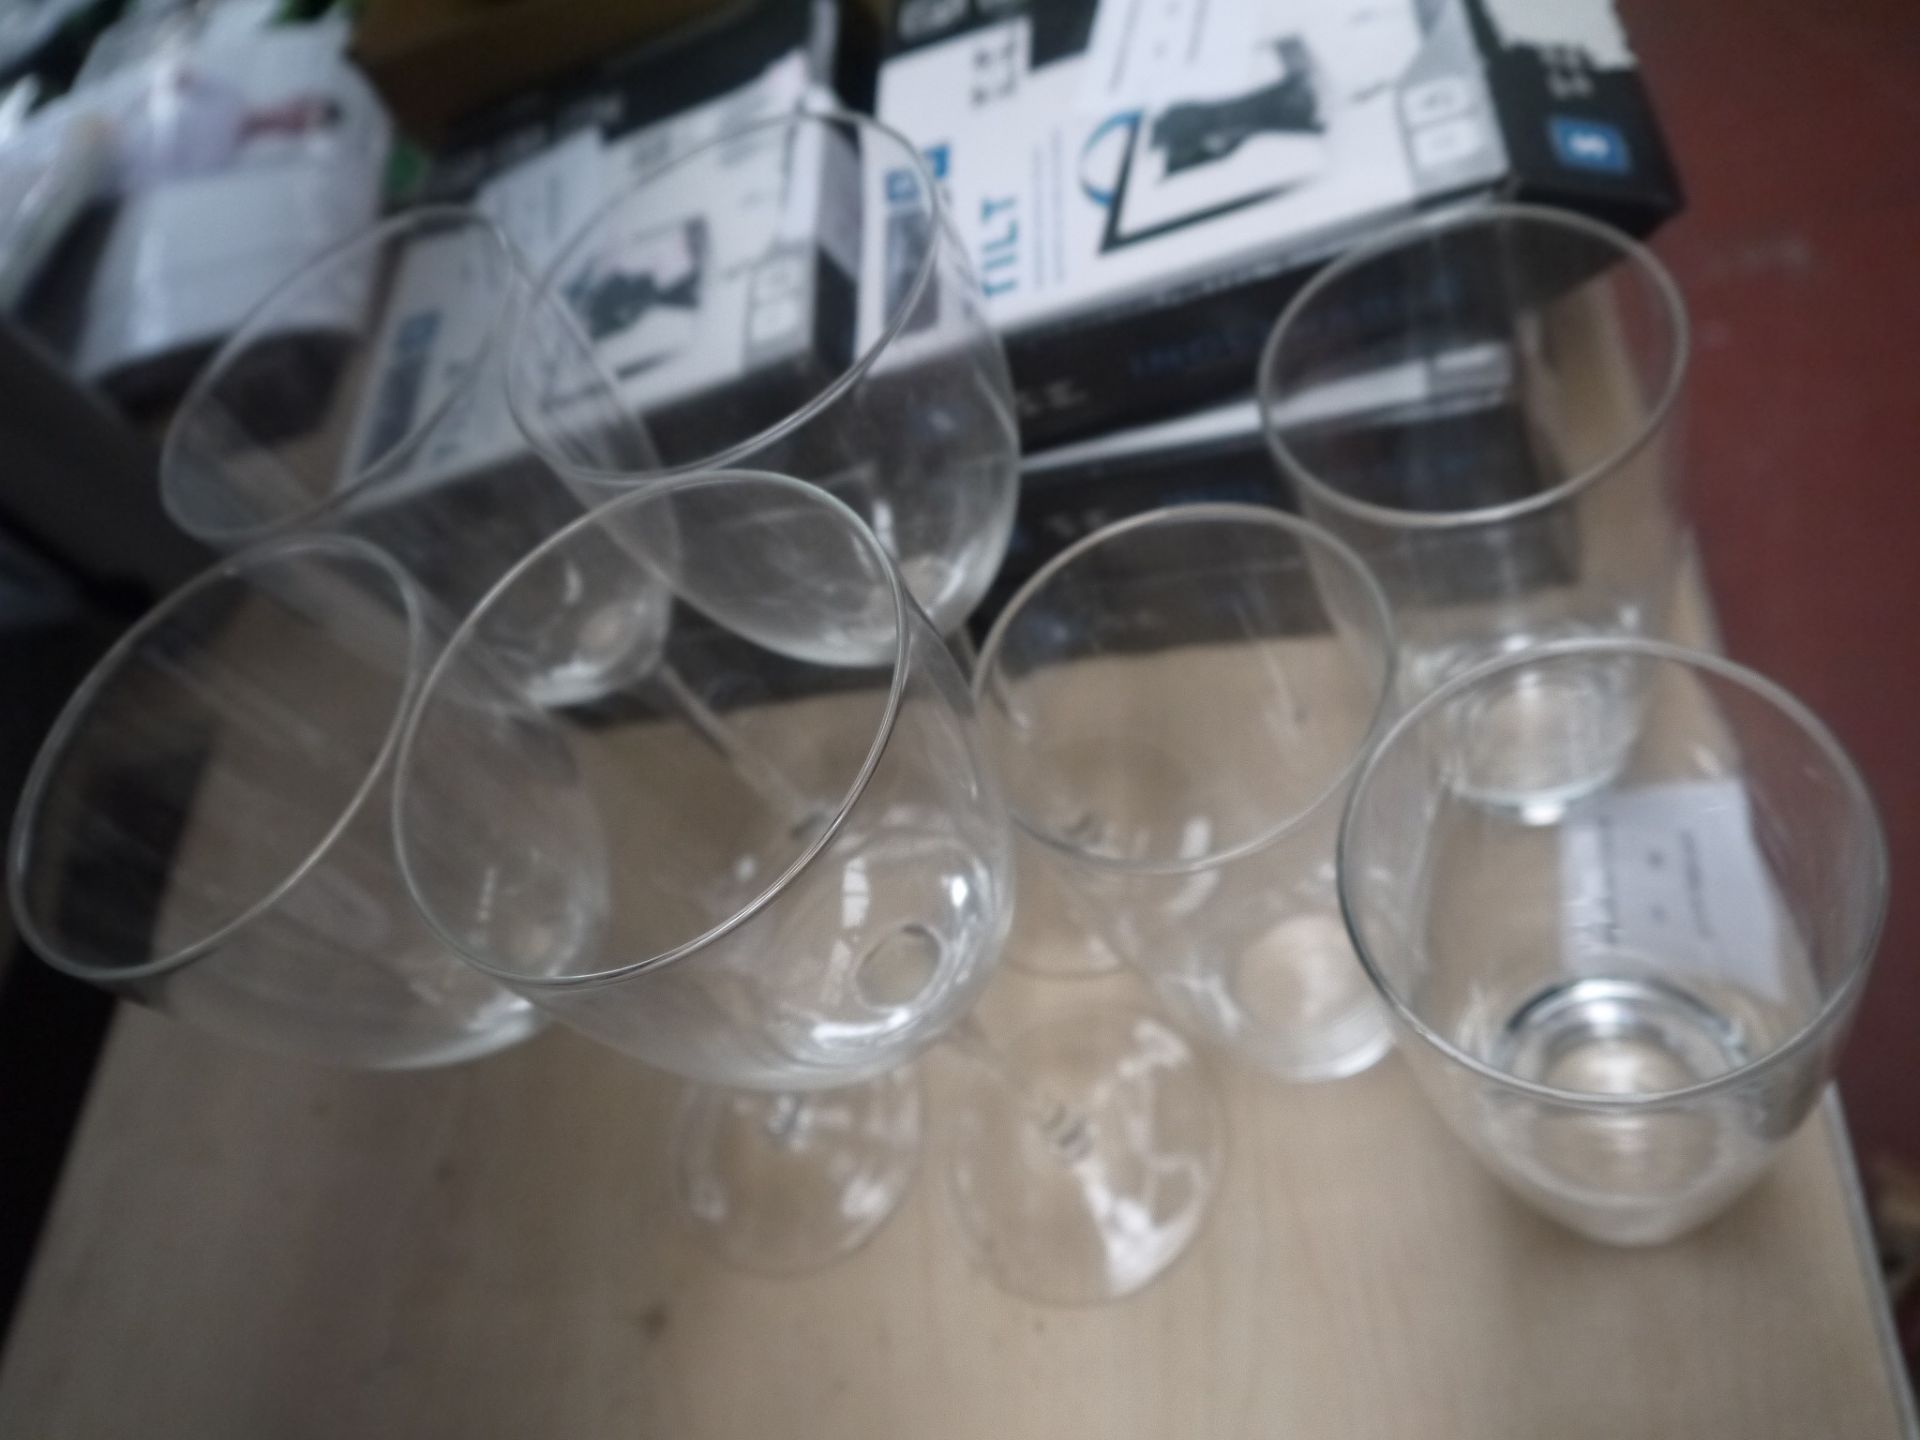 Set of 7 Drinking Glasses. Look in good condition.